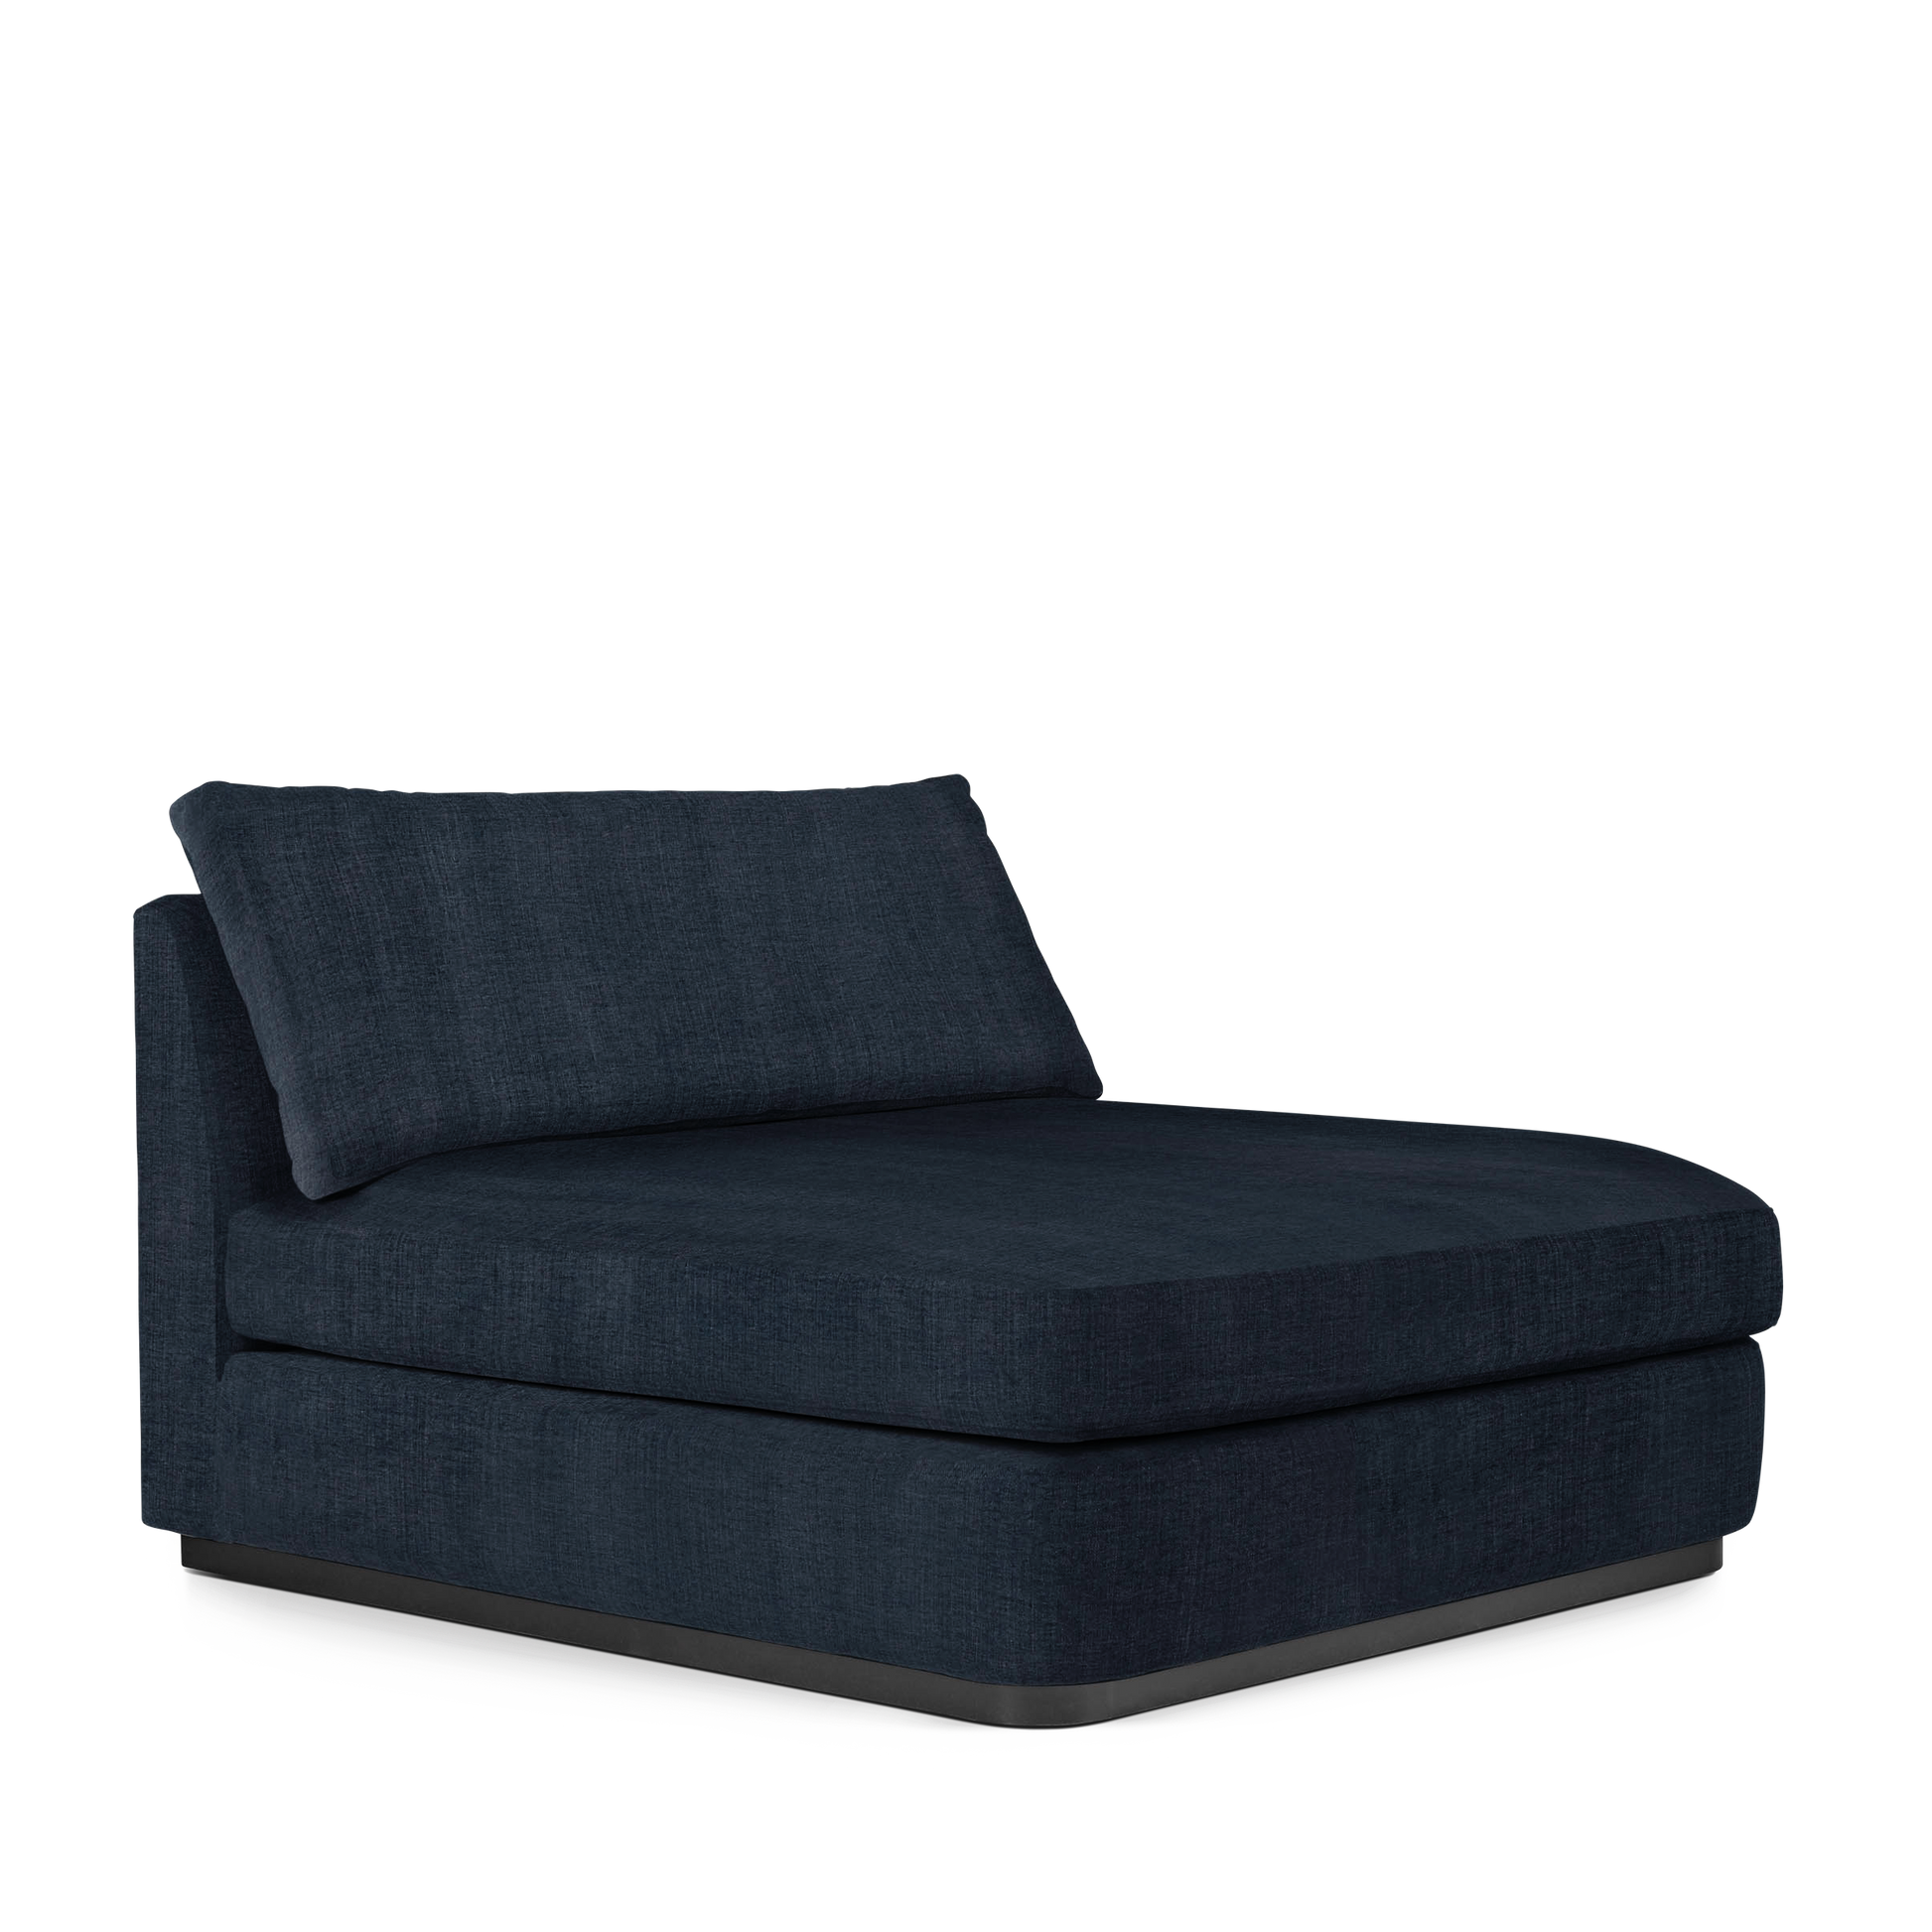 CALMA Lounge Bed with dark blue textile 